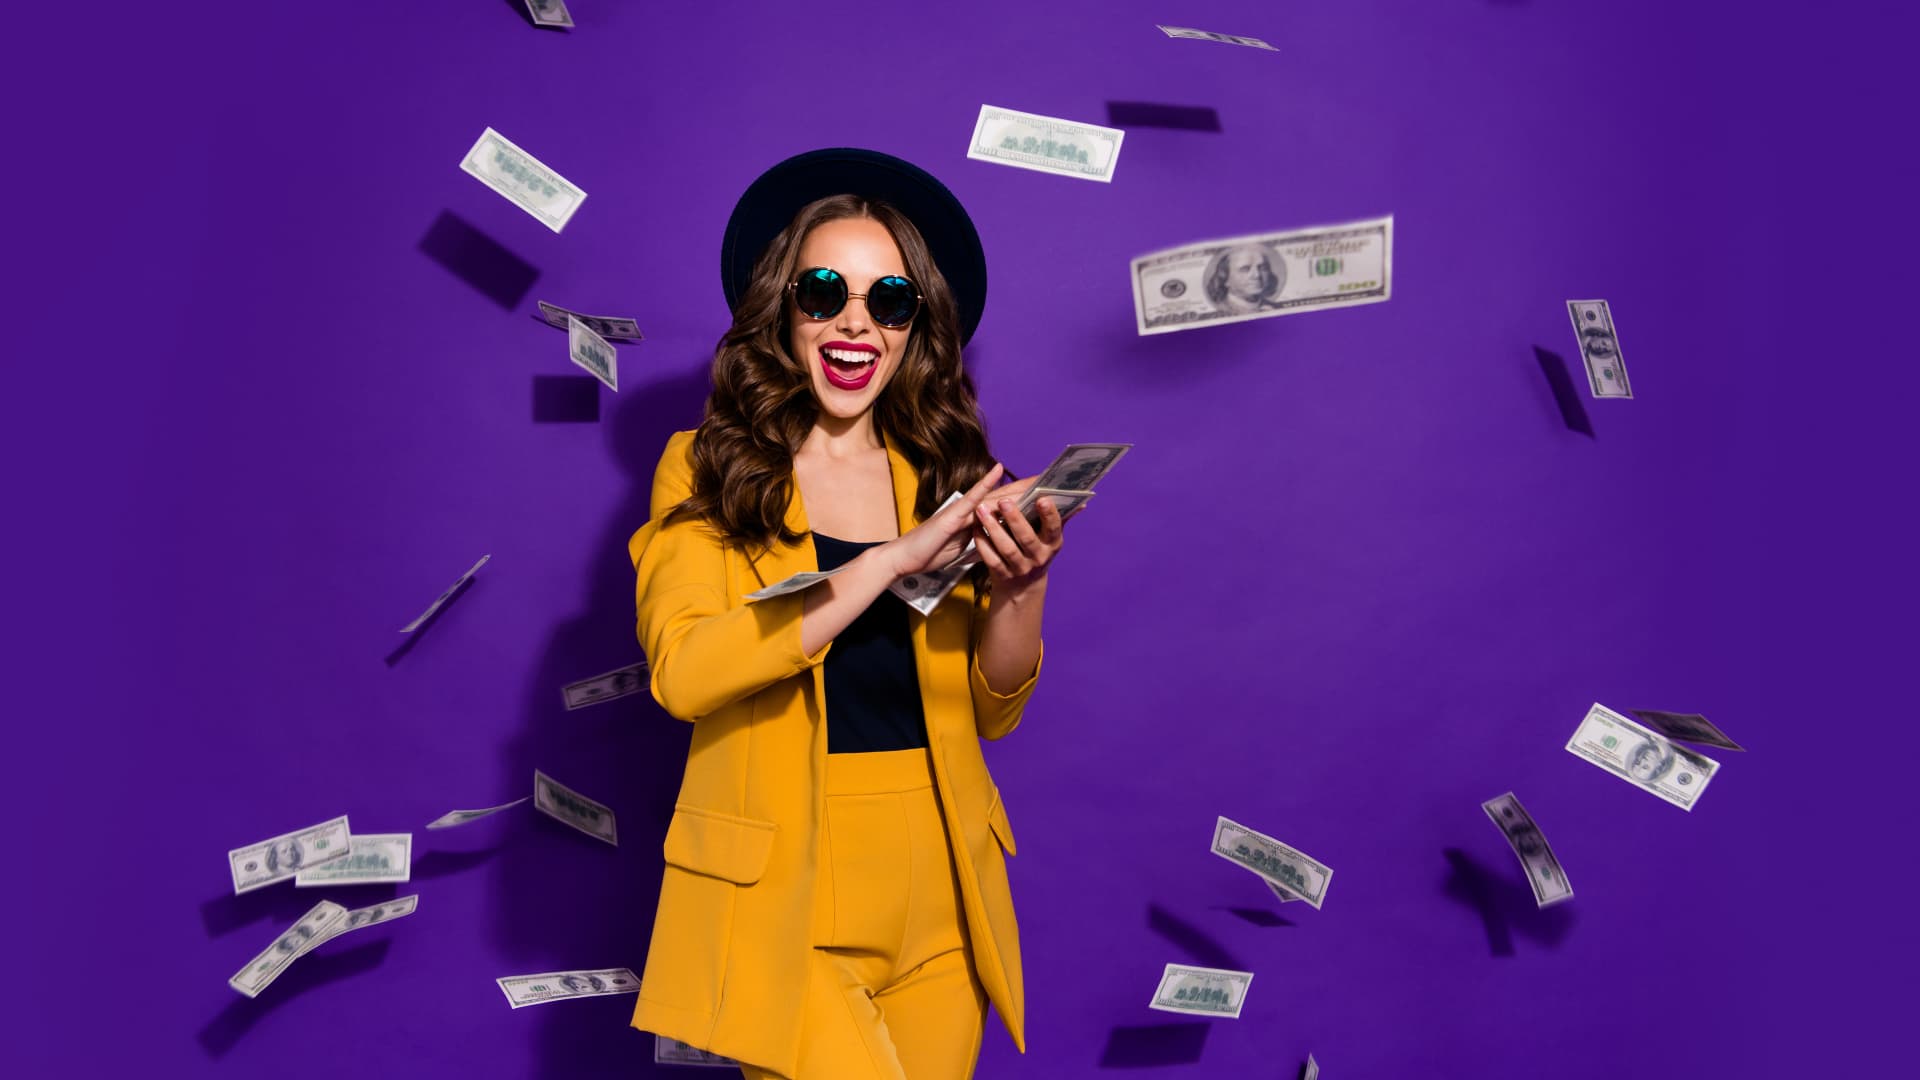 Earn extra income with these 11 'in-demand' side hustles, says millionaire—some can pay up to $3,000/month